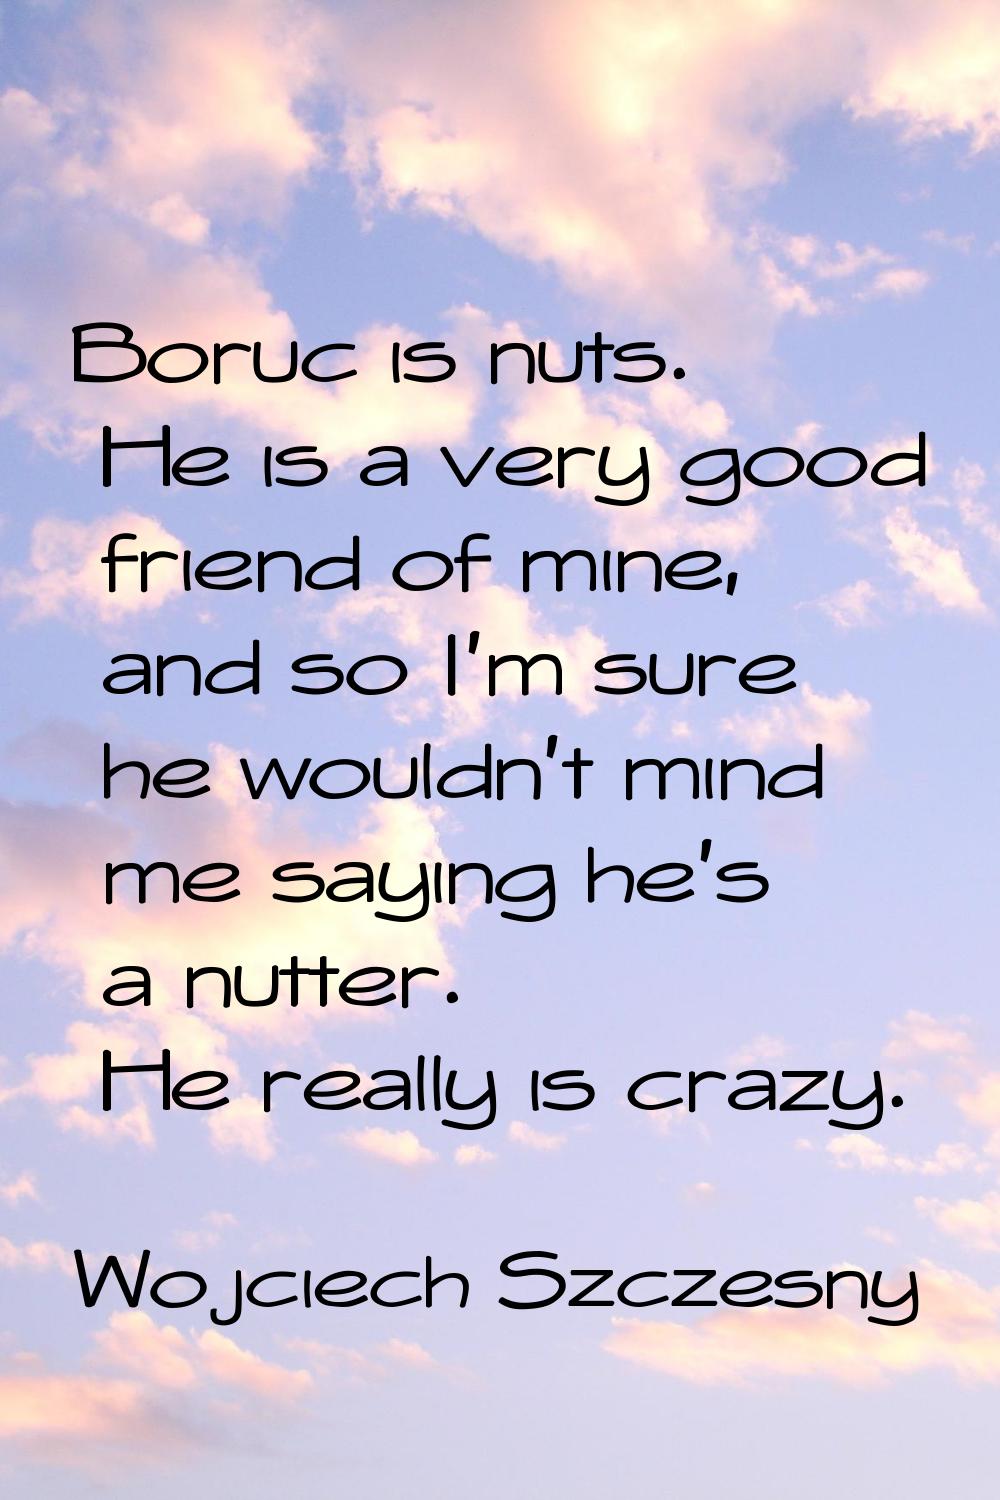 Boruc is nuts. He is a very good friend of mine, and so I'm sure he wouldn't mind me saying he's a 